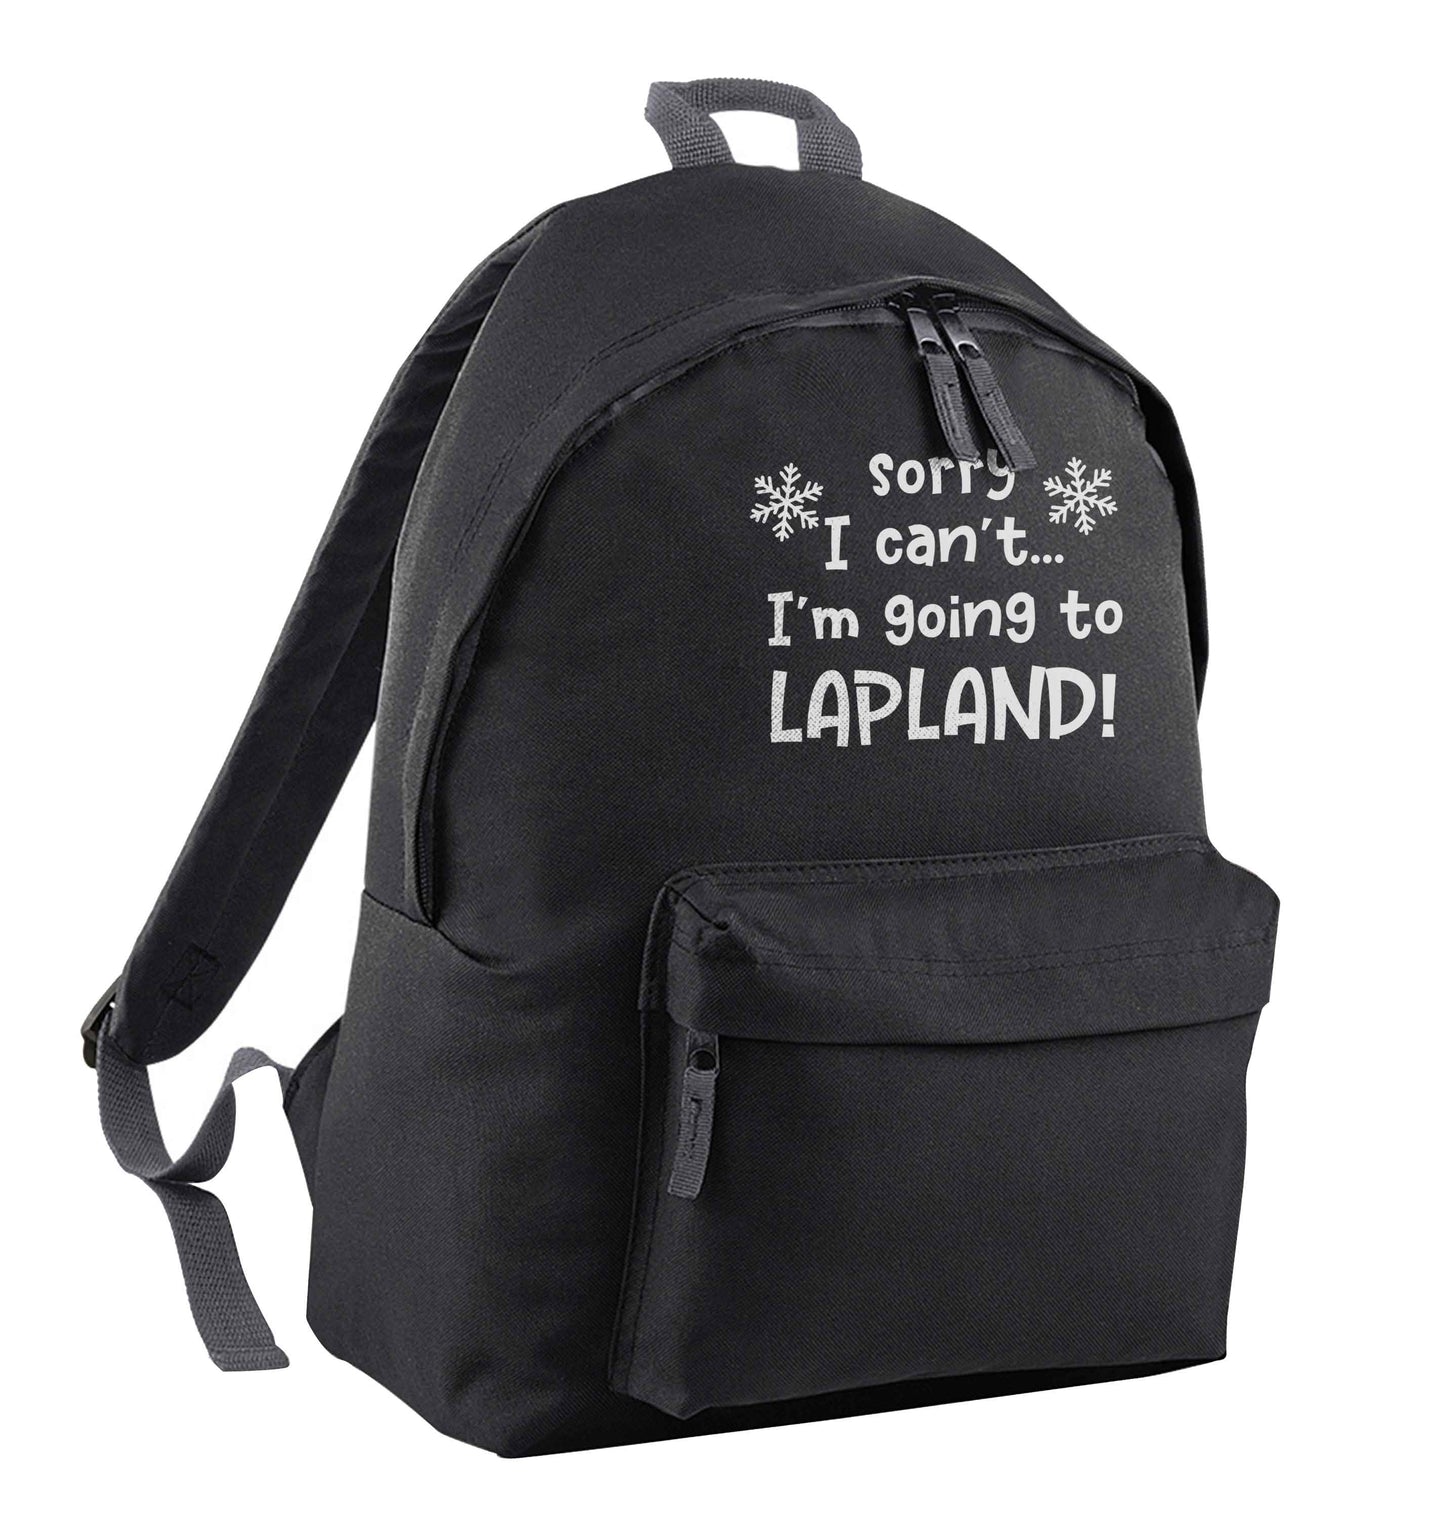 Sorry I can't I'm going to Lapland black children's backpack